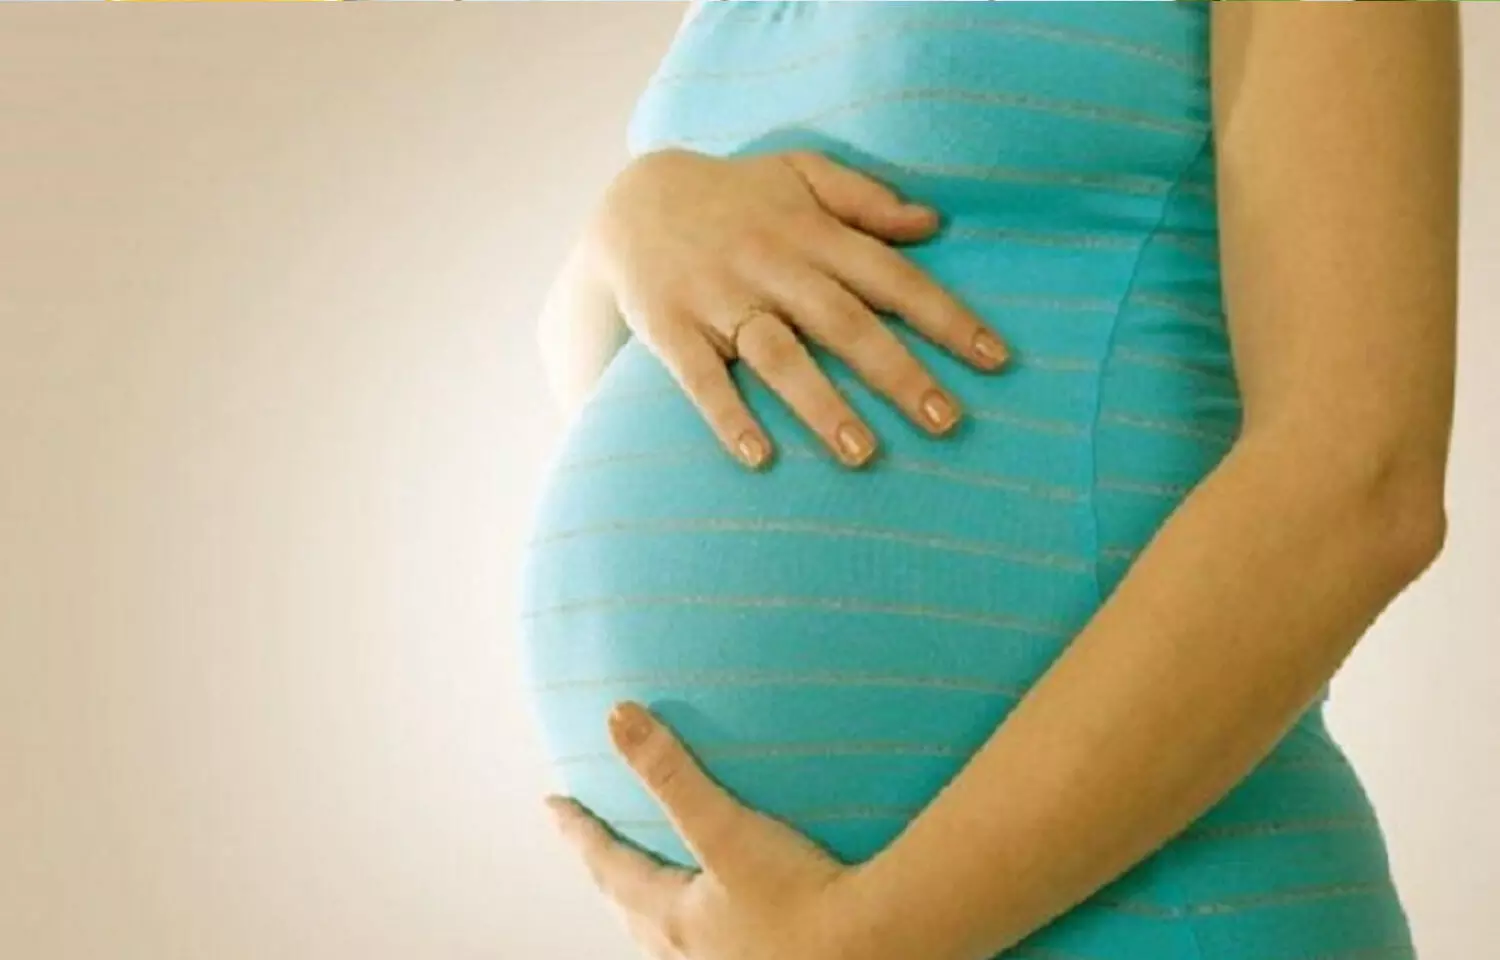 Probiotic strain helps pregnant women maintain healthy iron levels